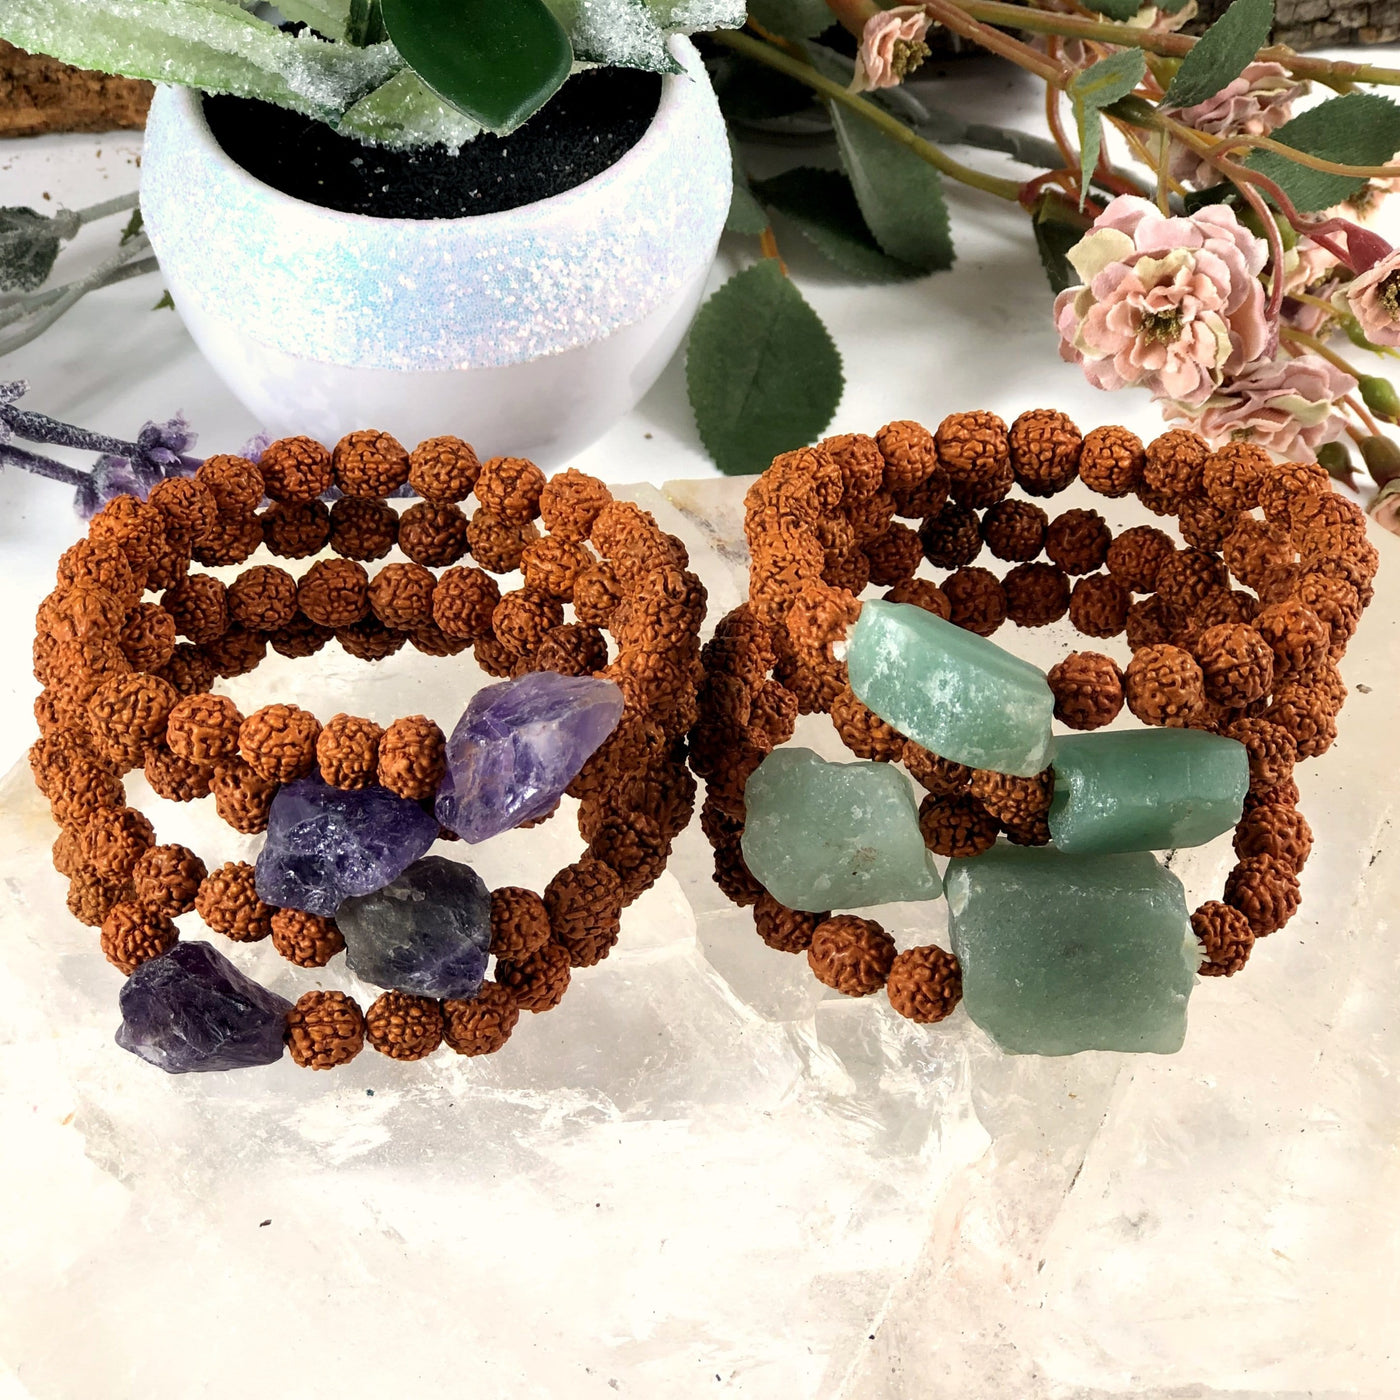 Diffuser Bracelet Radruska with Amethyst or Aventurine in Top of Each Other on White Background.